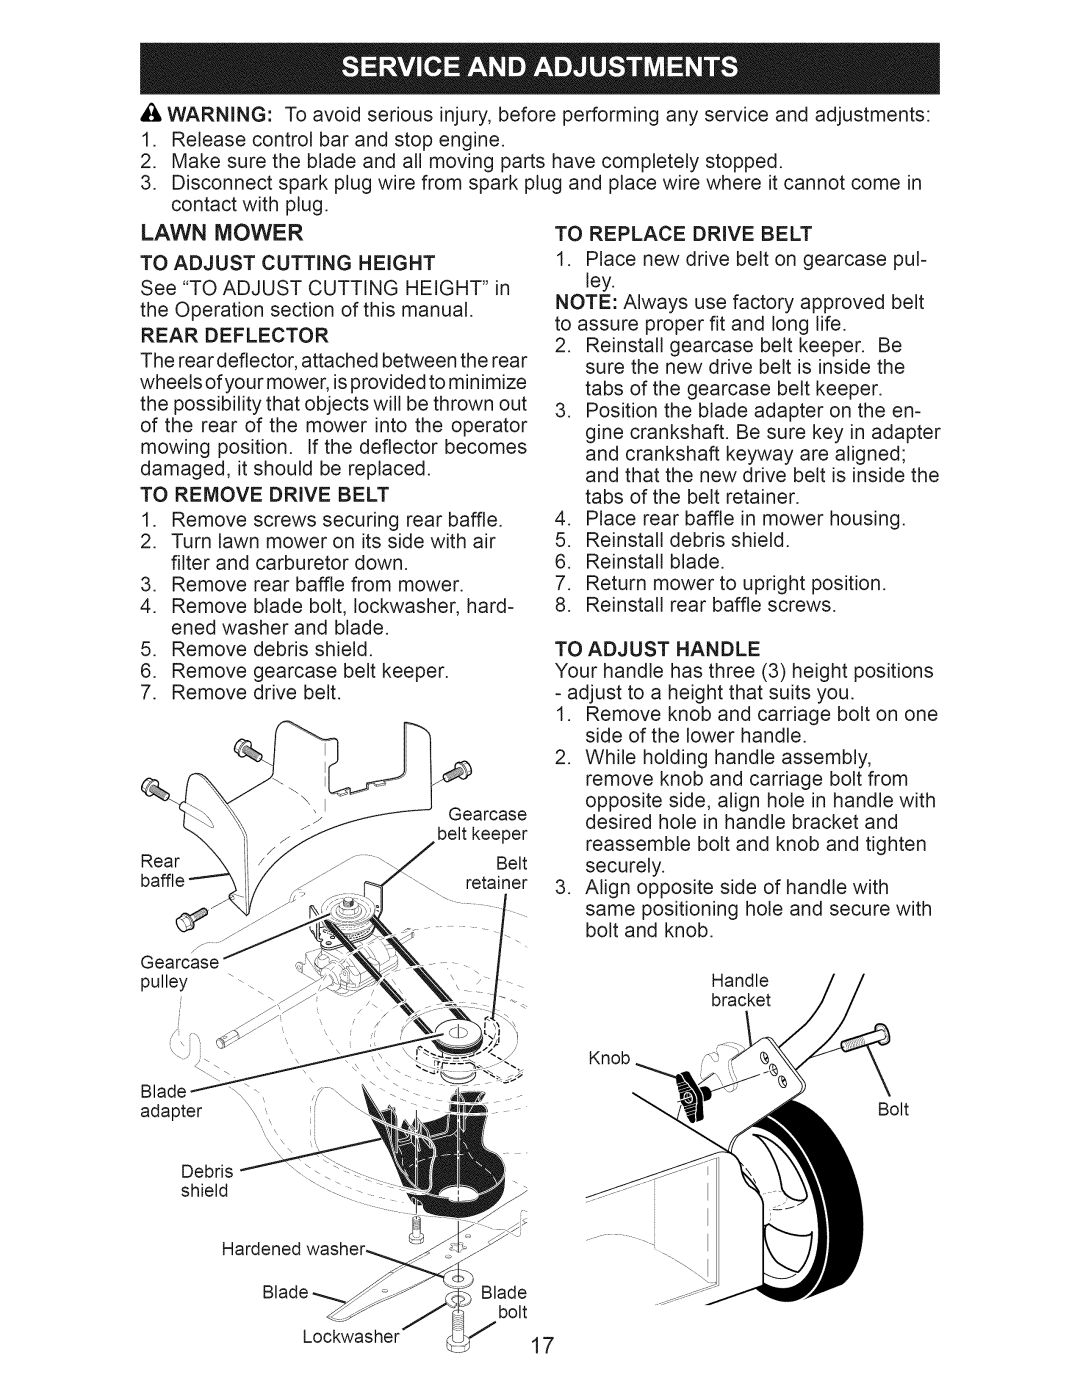 Craftsman 917.374364 manual contact with plug, Lawn Mower 